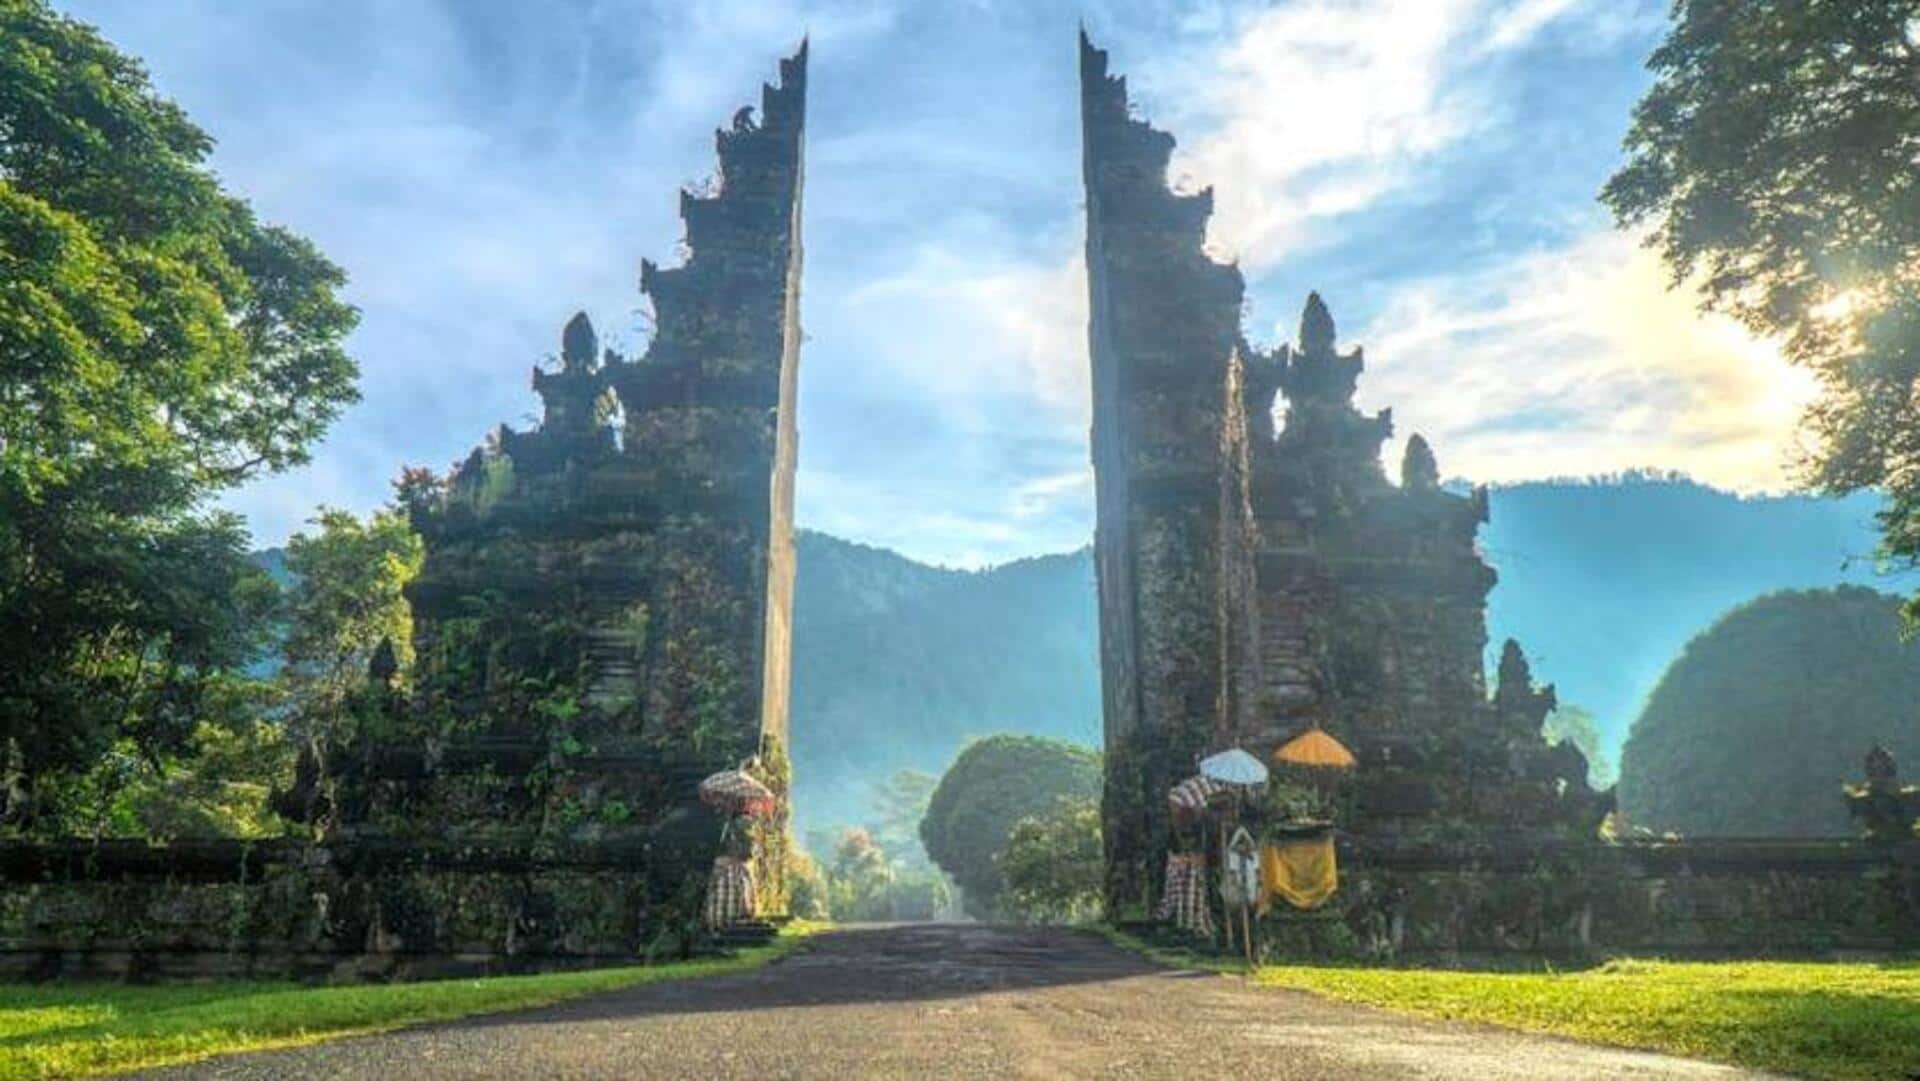 A guide to discovering Bali's hidden gems